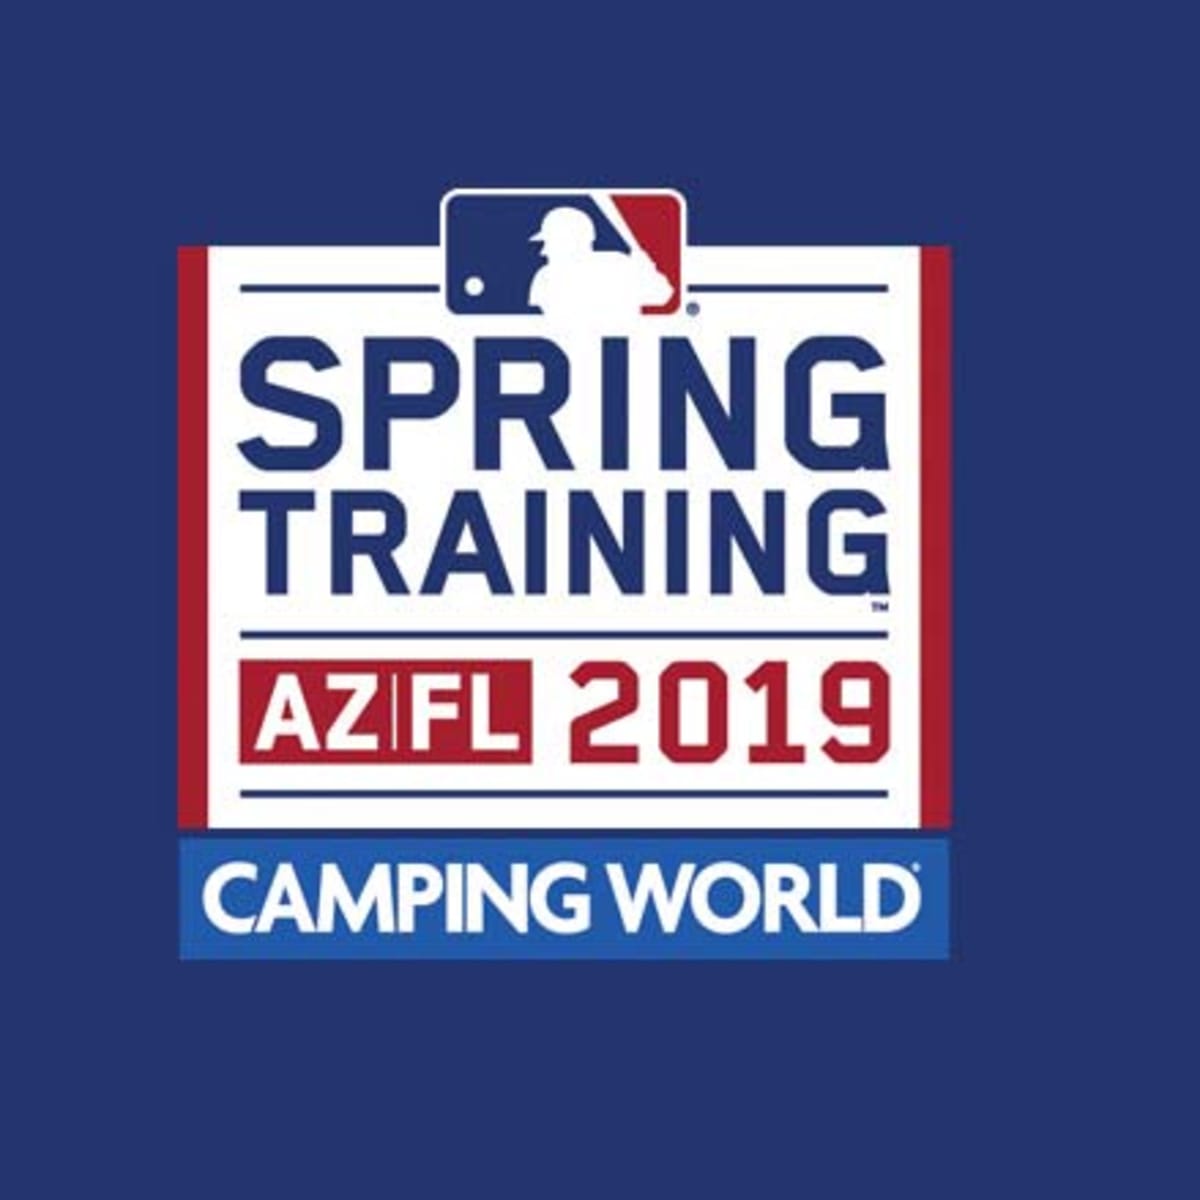 MLB Spring Training 2019 Reporting Dates and Locations